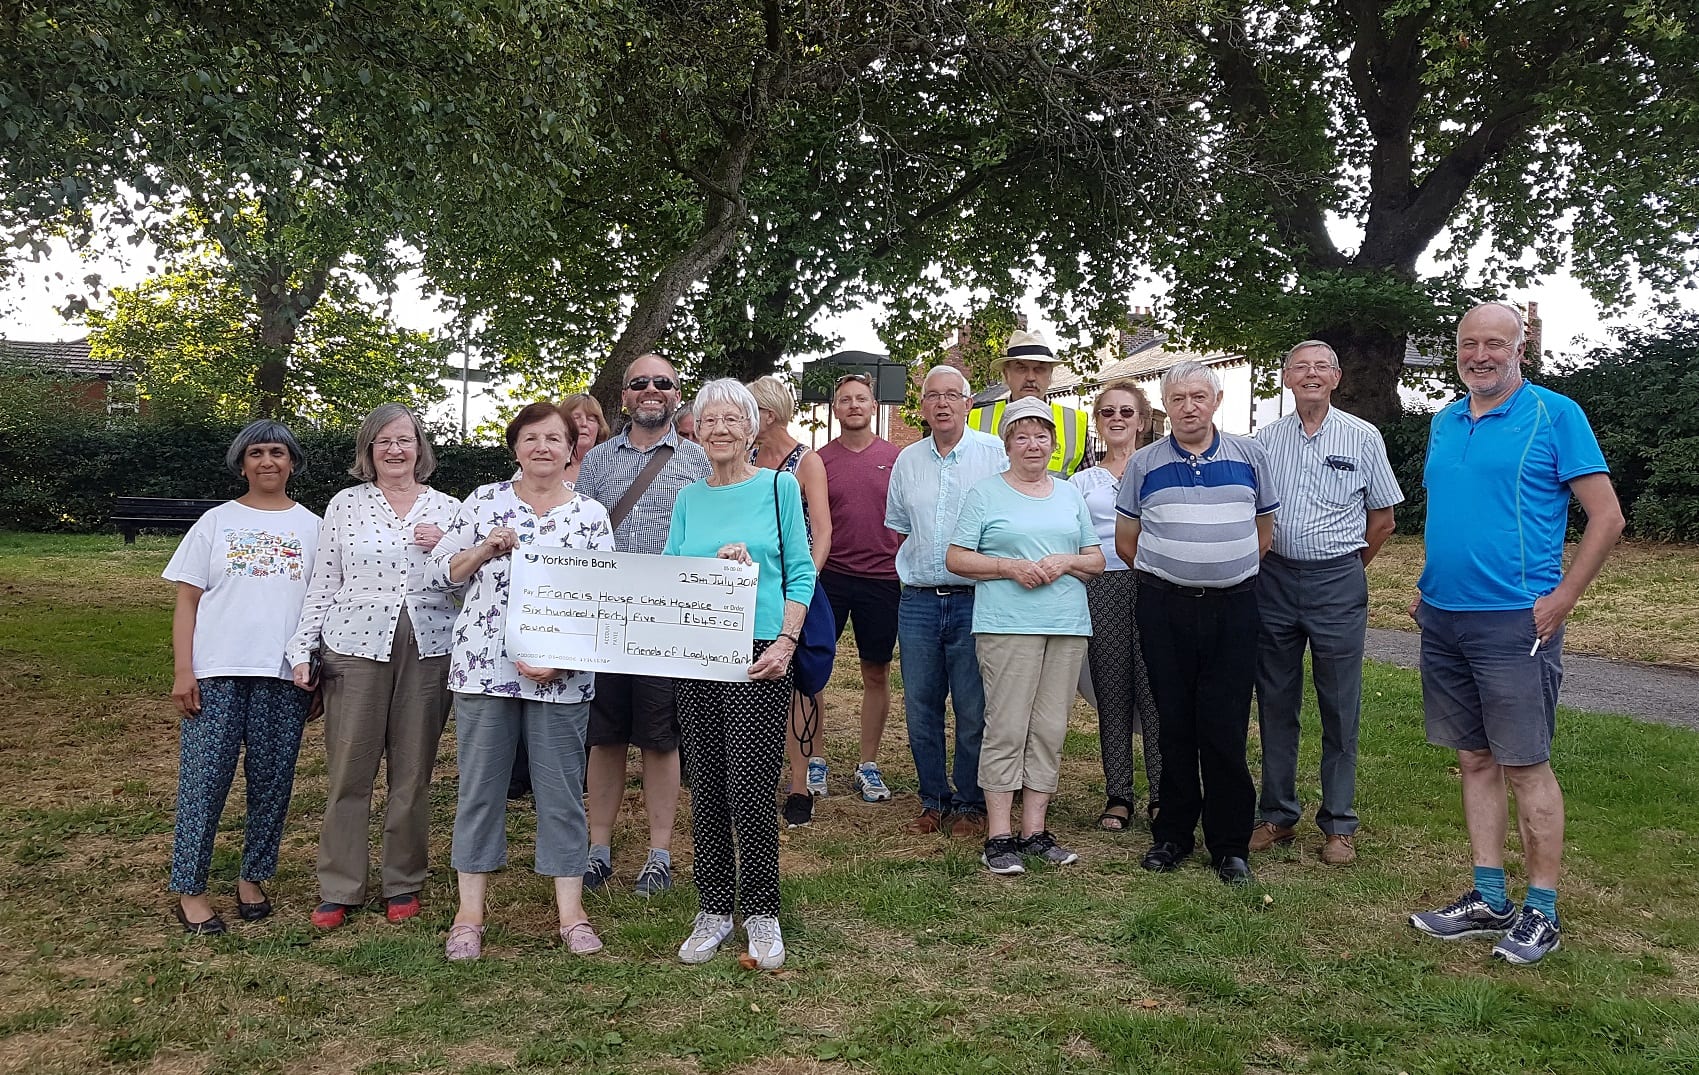 Friends of Ladybarn Park fundraised for Francis House